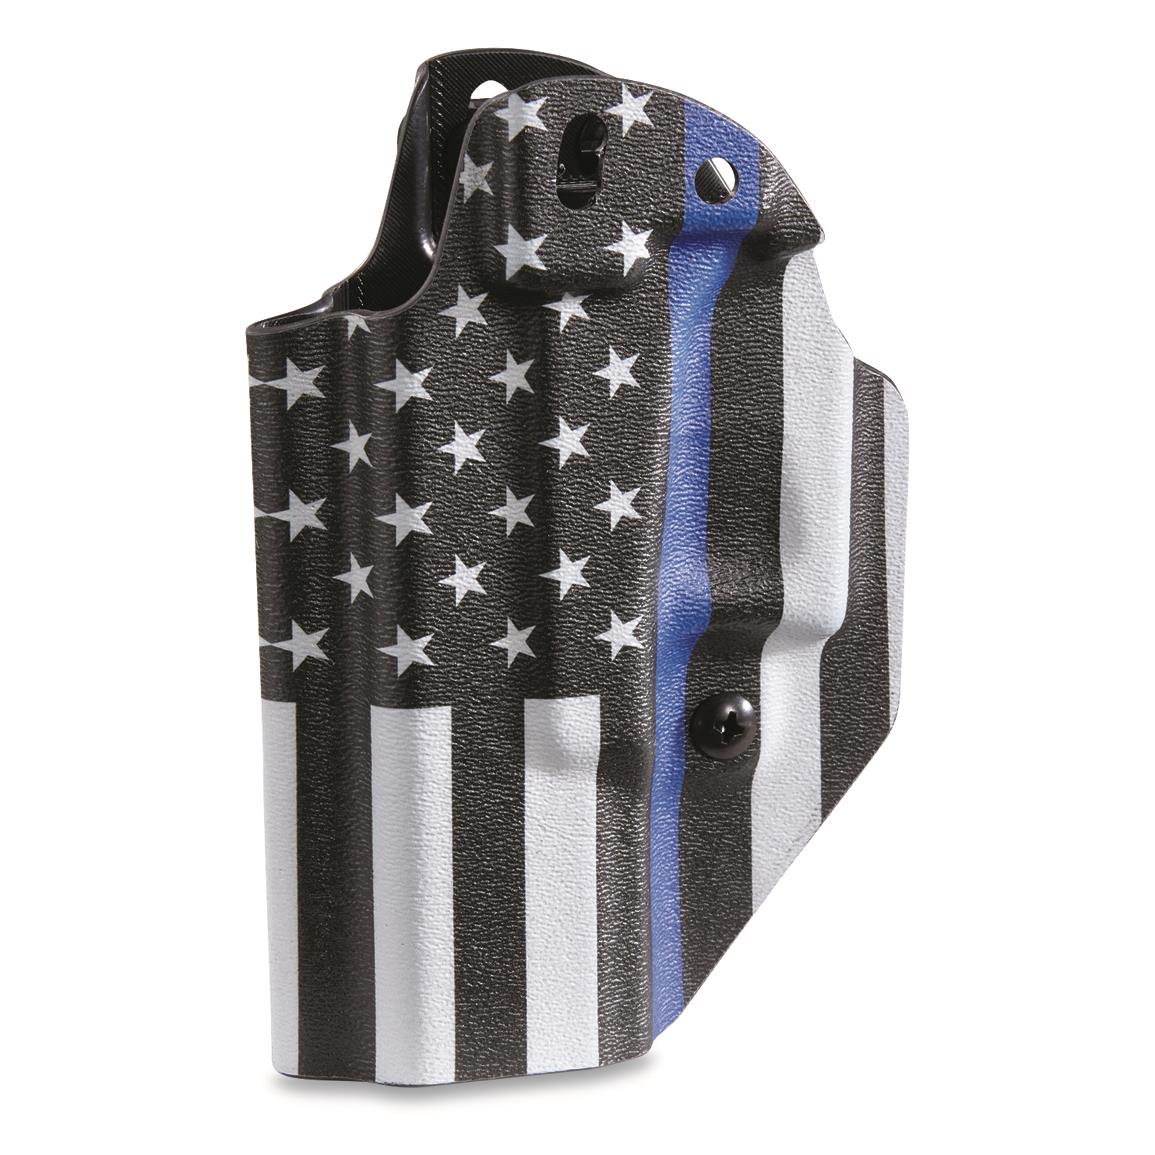 Mission First Tactical Ambidextrous Appendix IWB/OWB Holster, Glock 19, Thin Blue Line